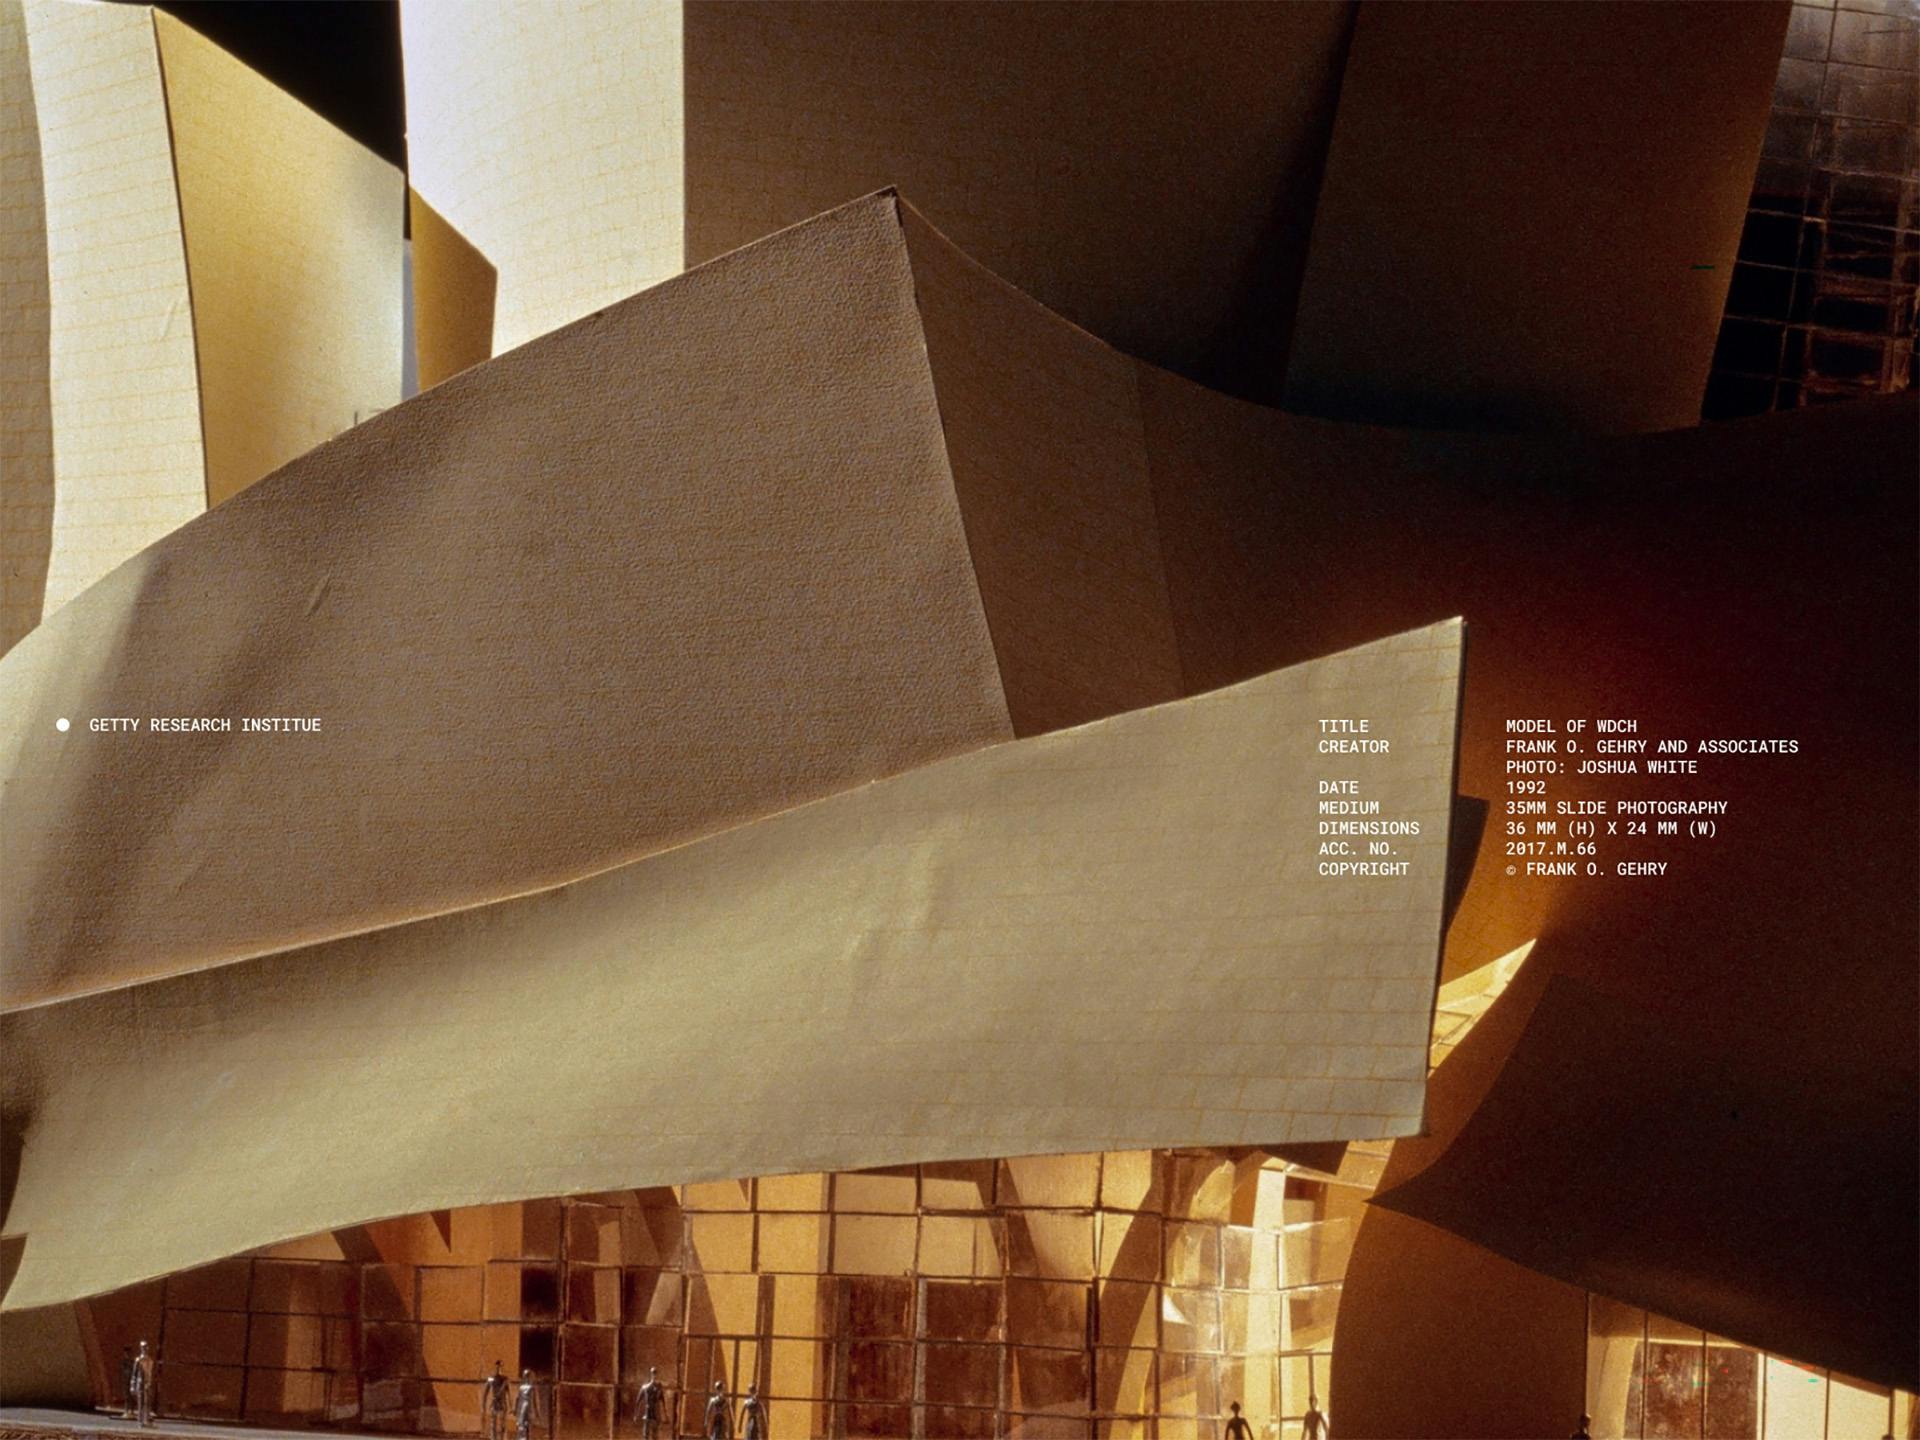 Gehry Archive Goes to Getty | 2017-05-01 | Architectural Record